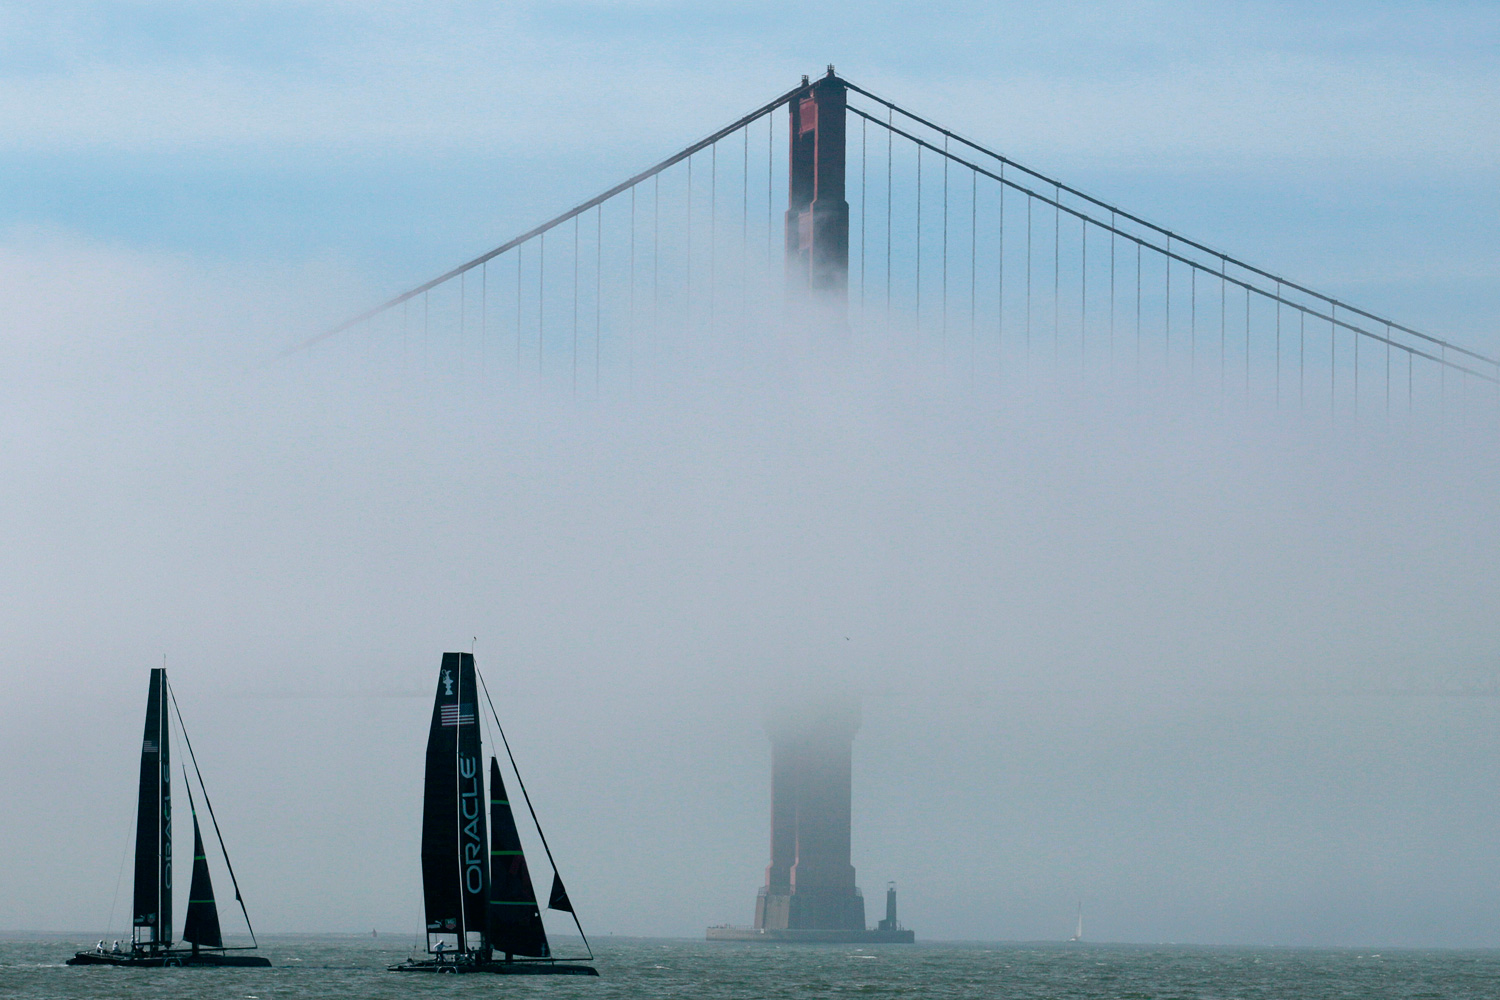 Feb. 21, 2012. A pair of Oracle Racing AC45s sail past the Golden Gate Bridge in San Francisco.